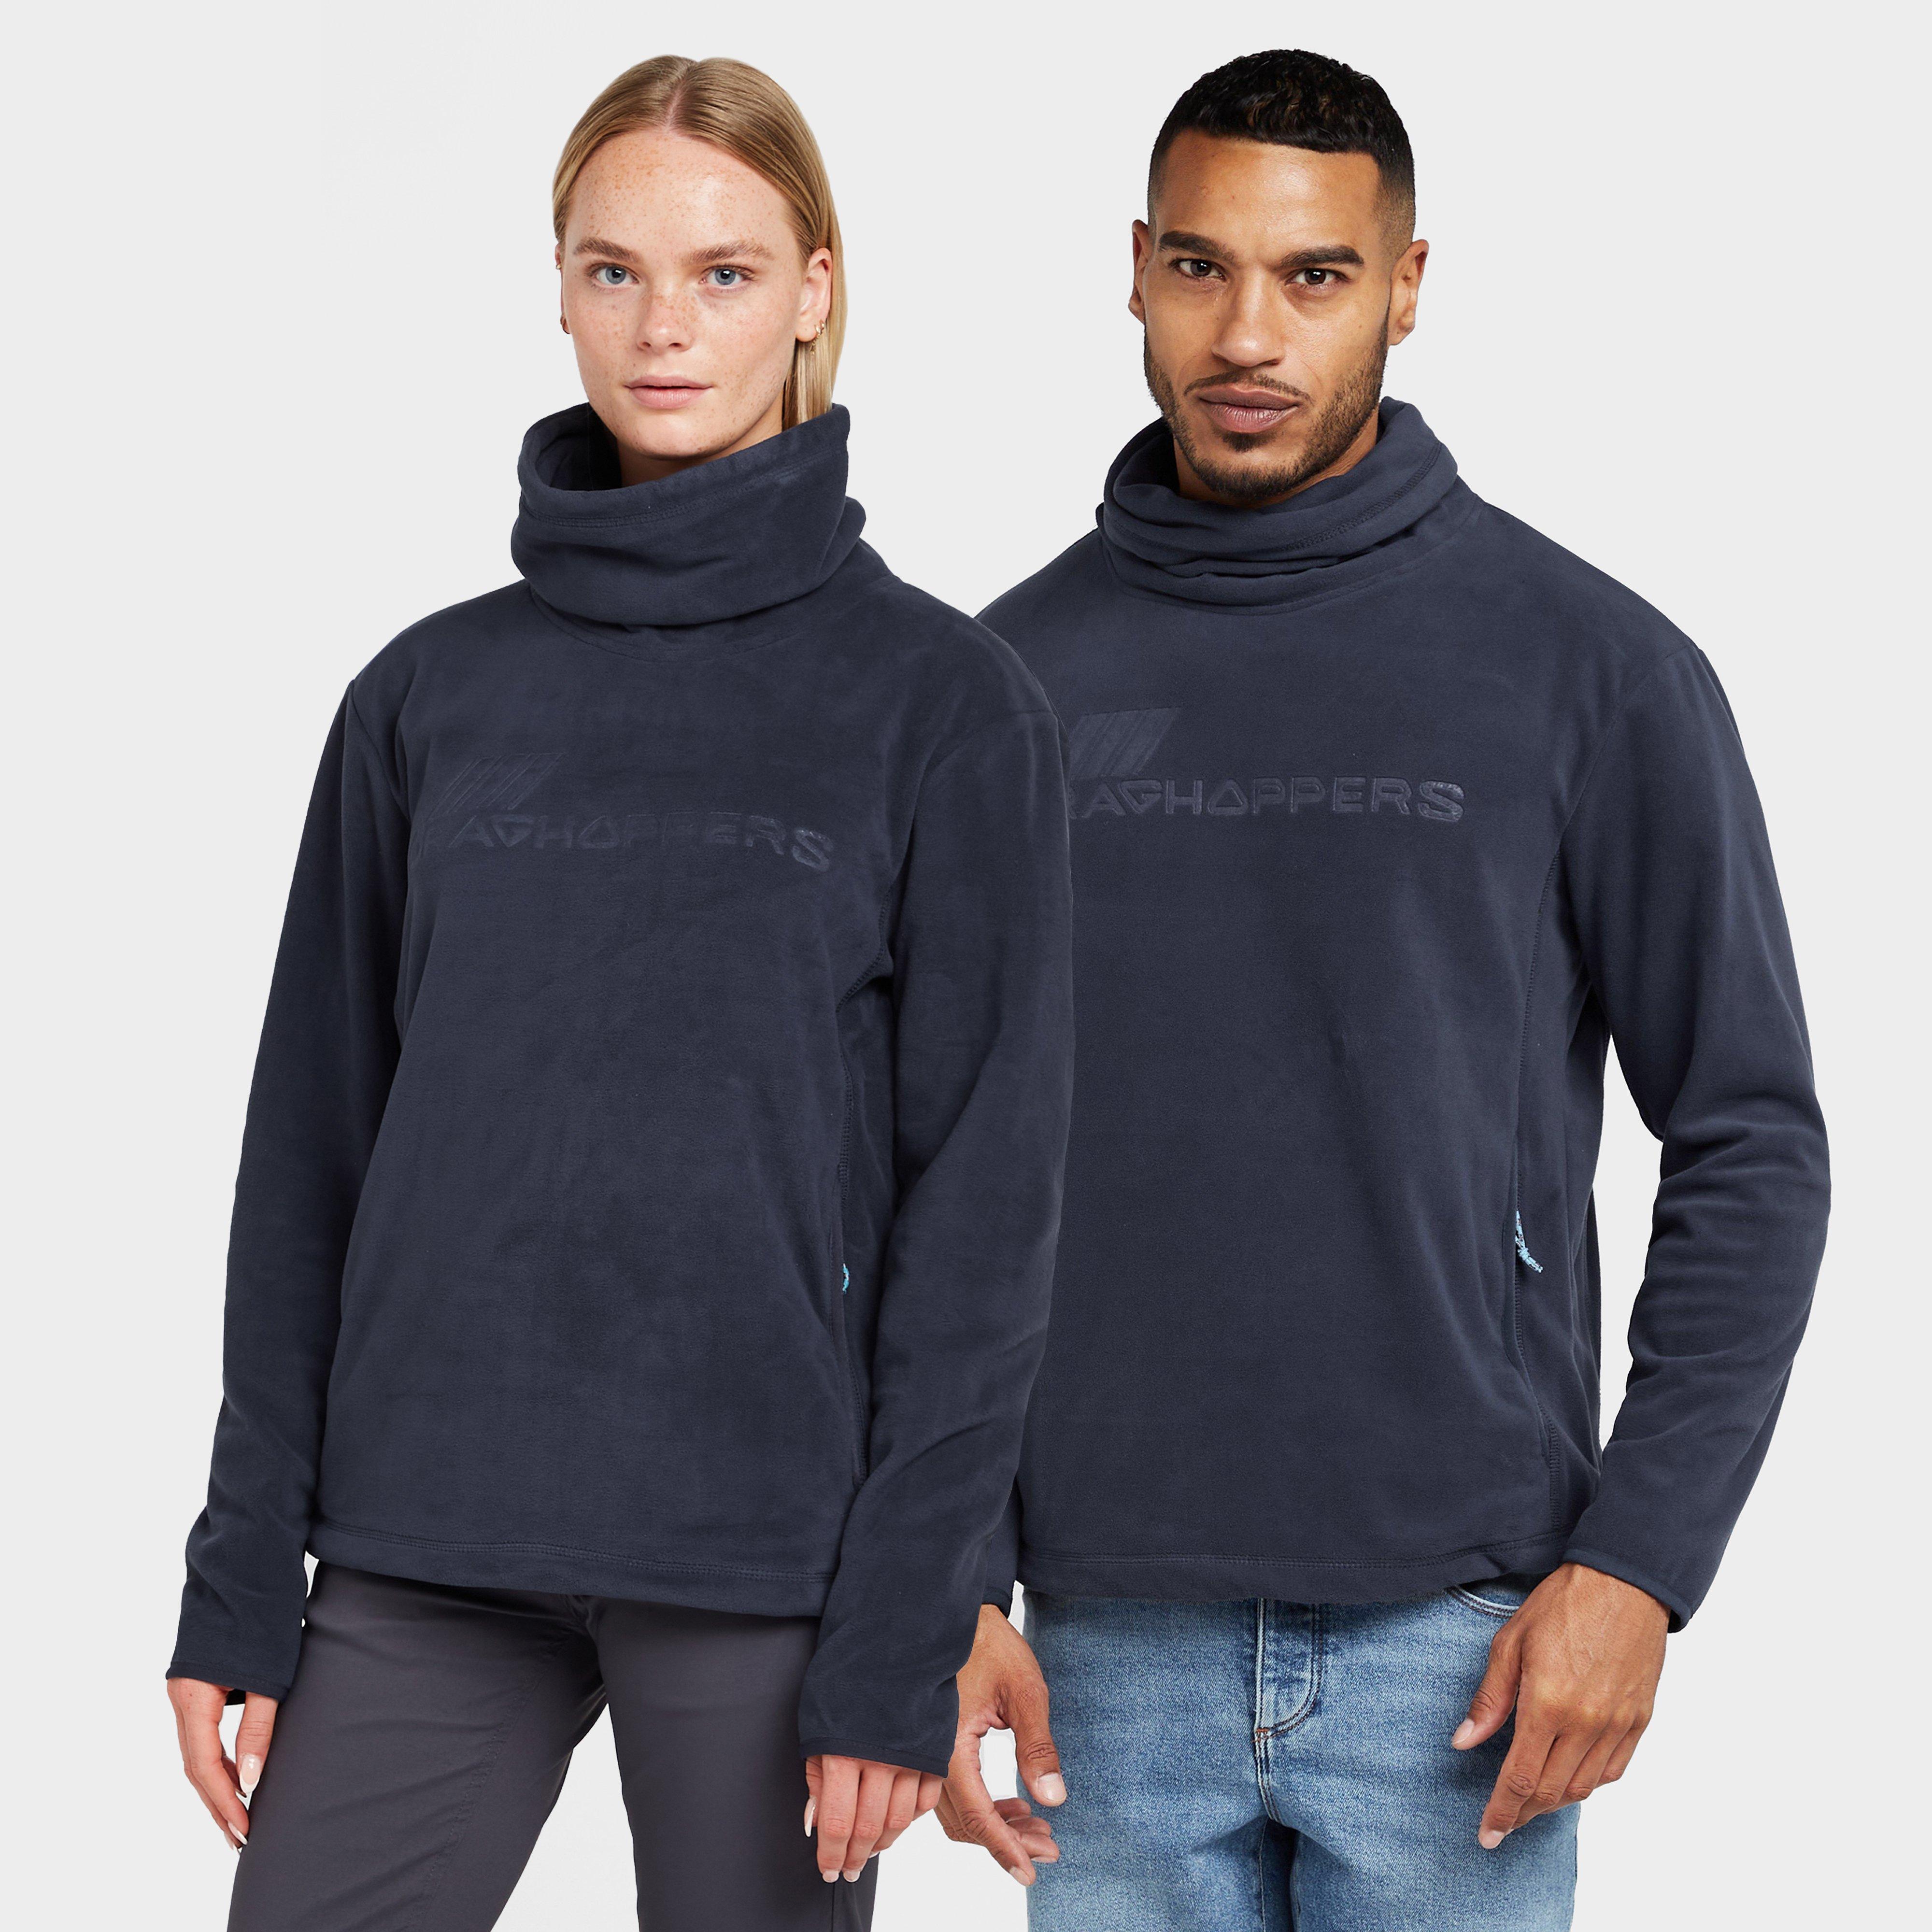 Craghoppers Craghoppers Unisex Frey Overhead Sweater - Navy Blue, Navy Blue